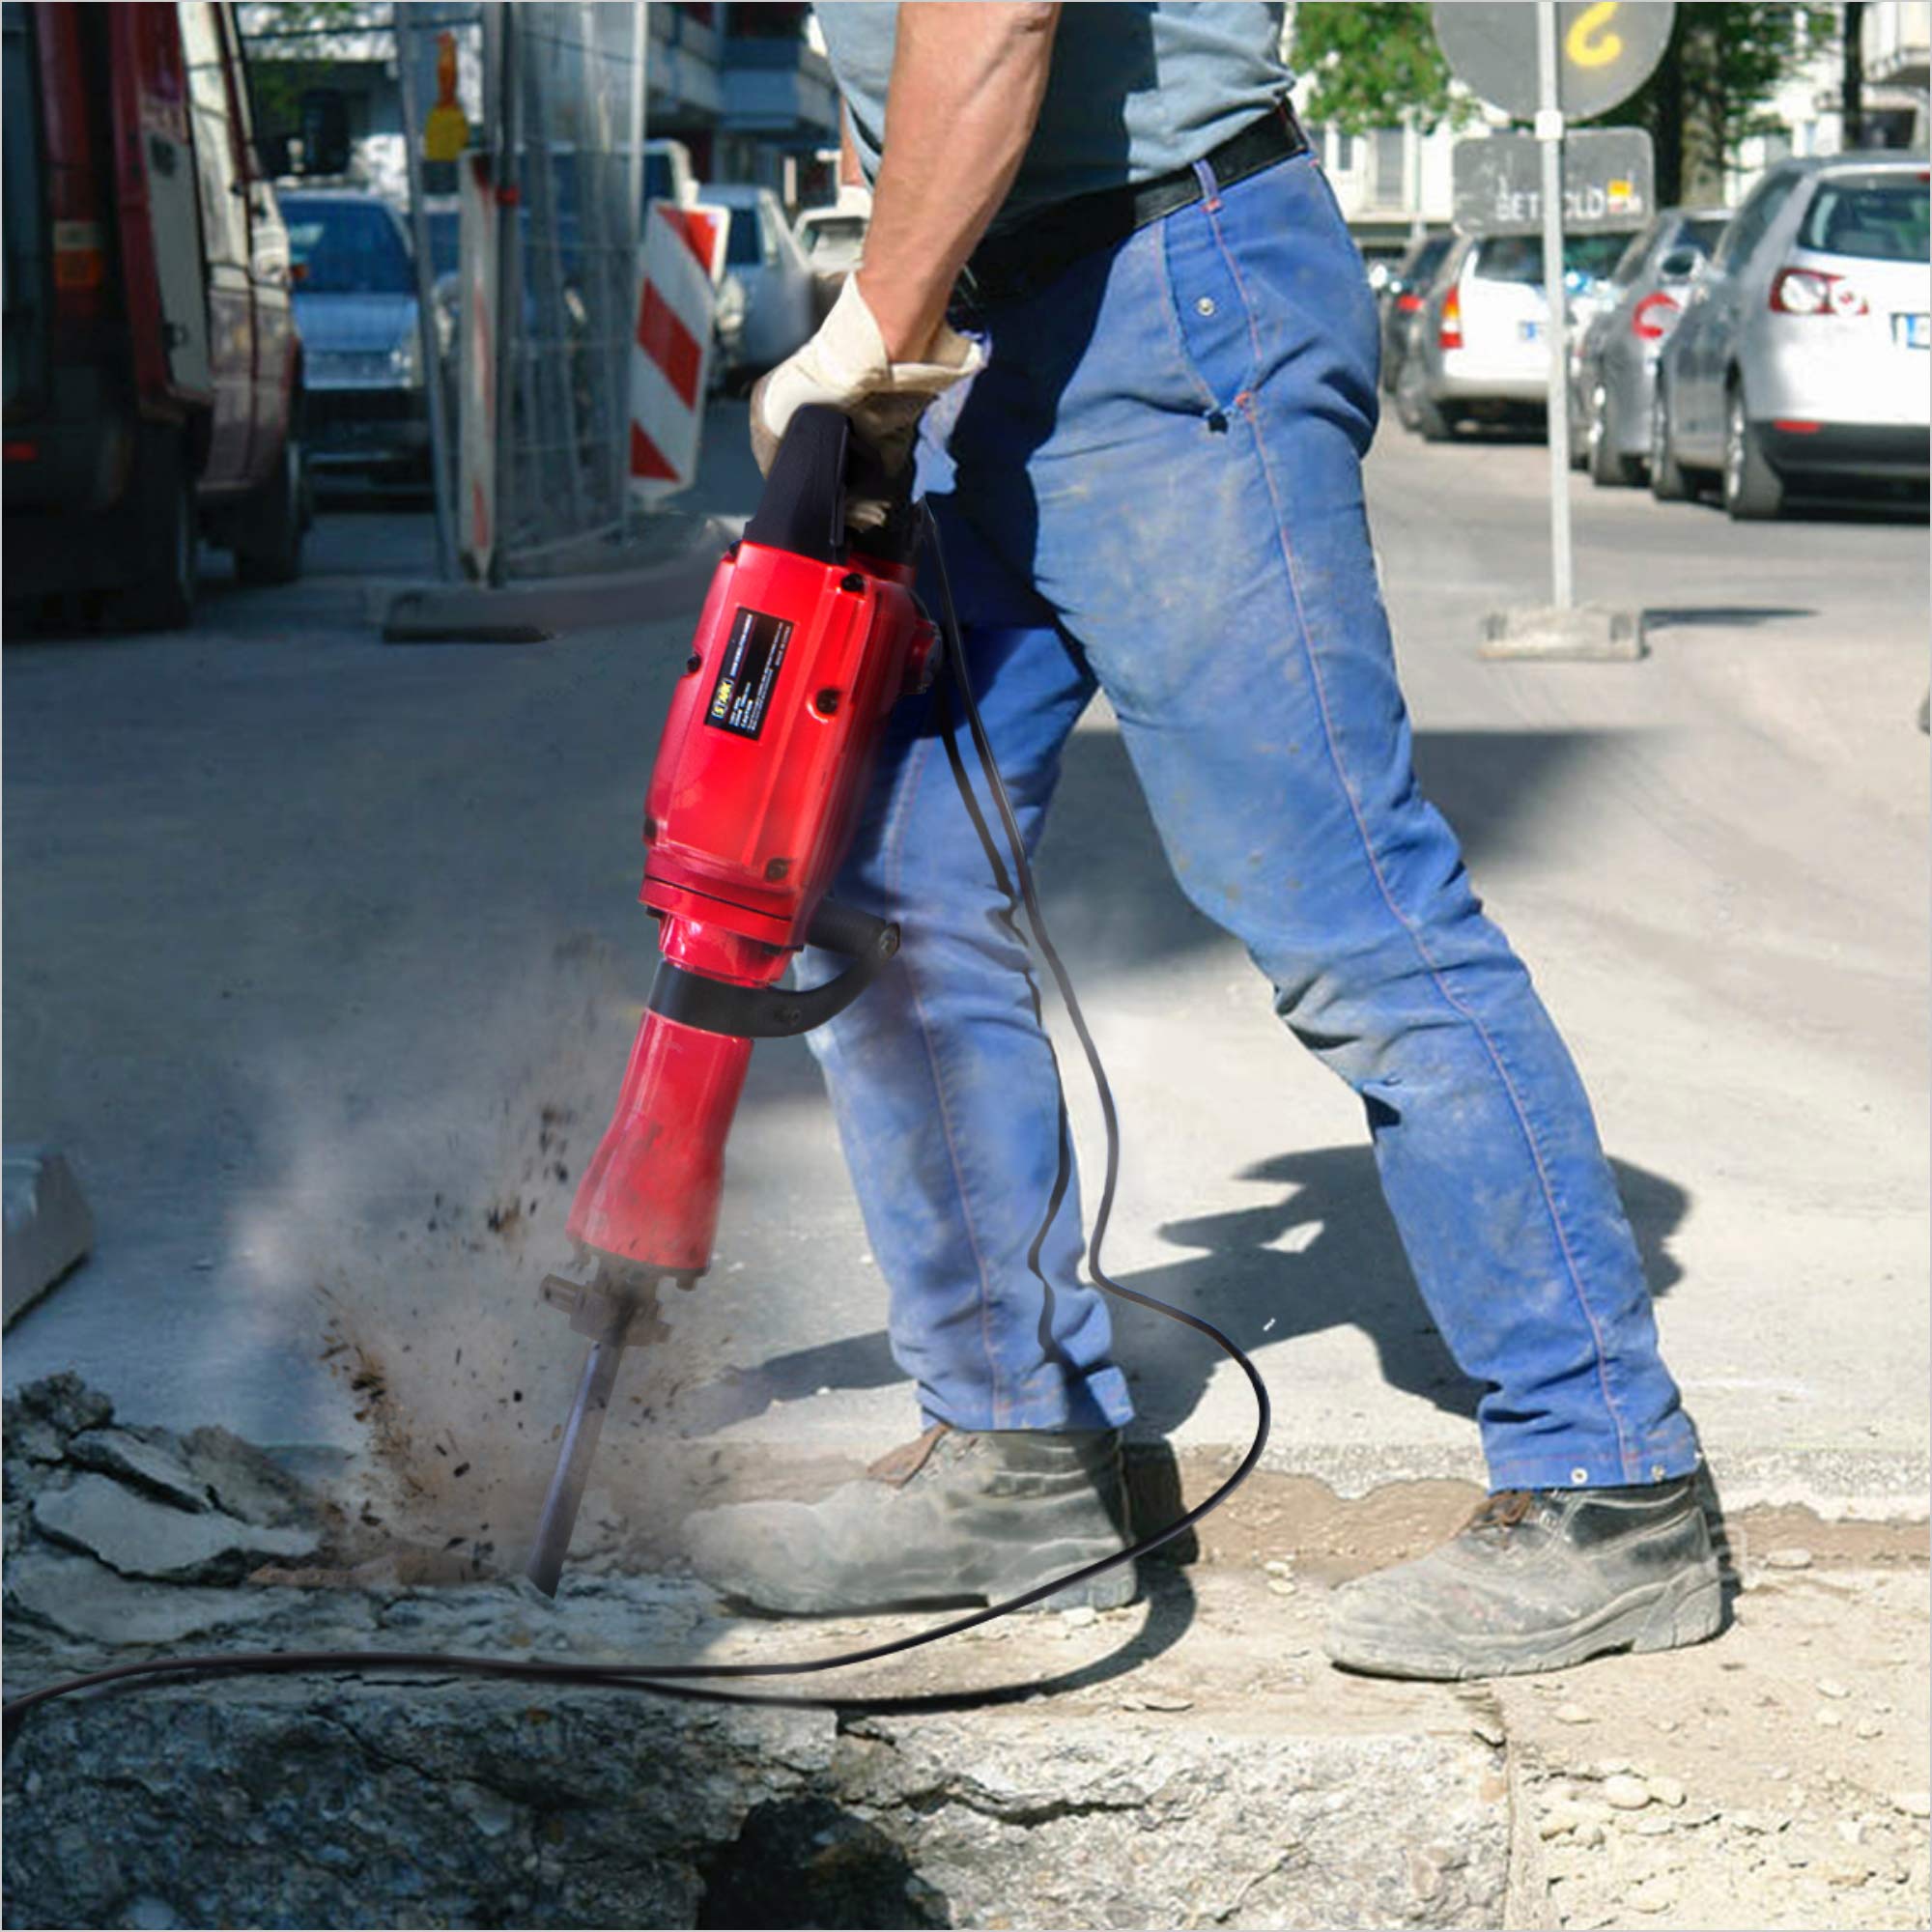 How do jackhammers and pneumatic drills work?